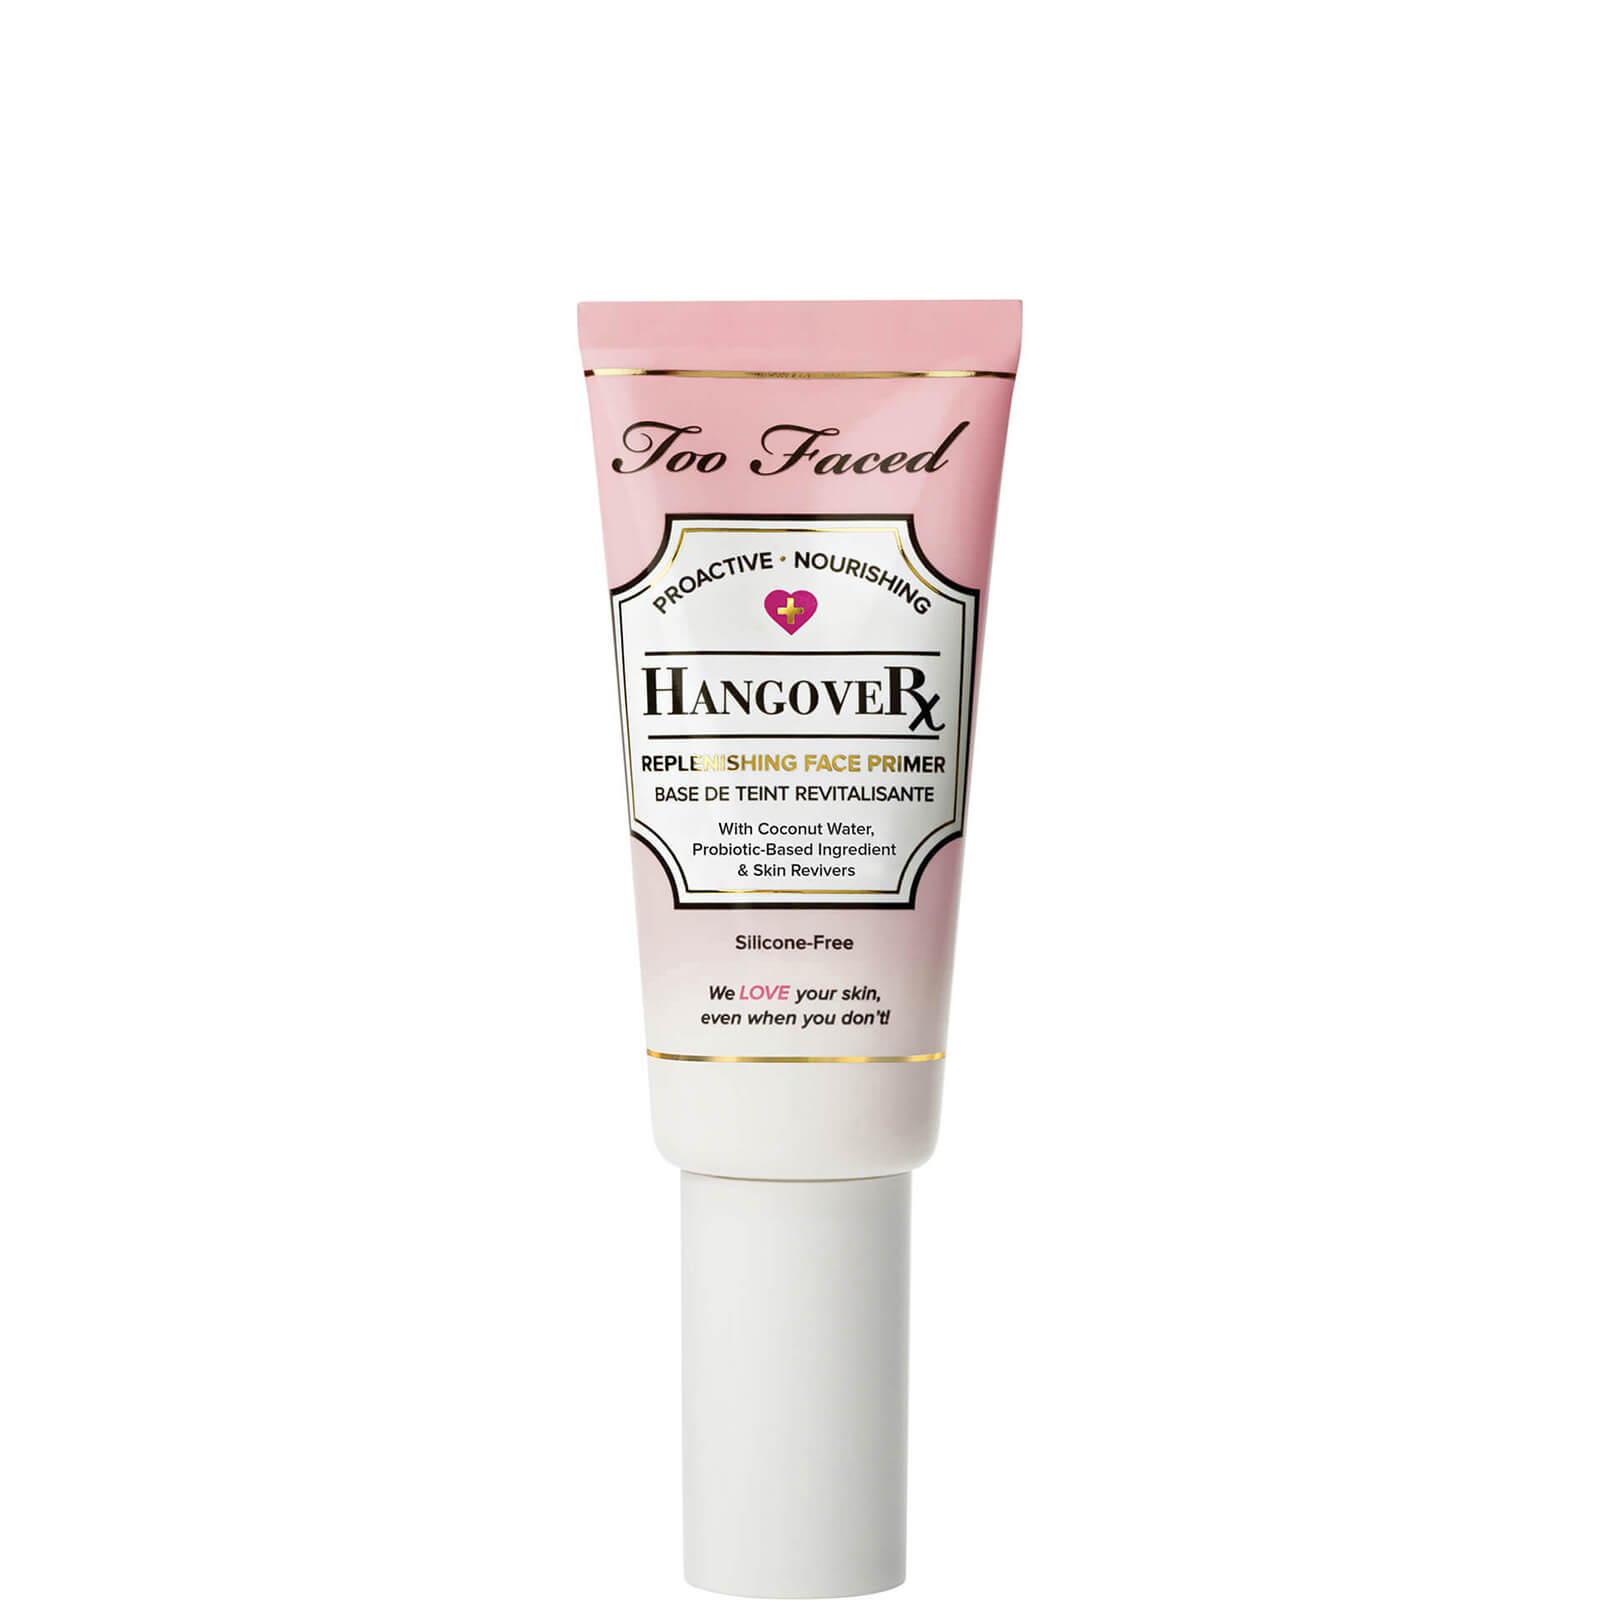 Photos - Foundation & Concealer Too Faced Hangover Replenishing Face Primer 40ml 